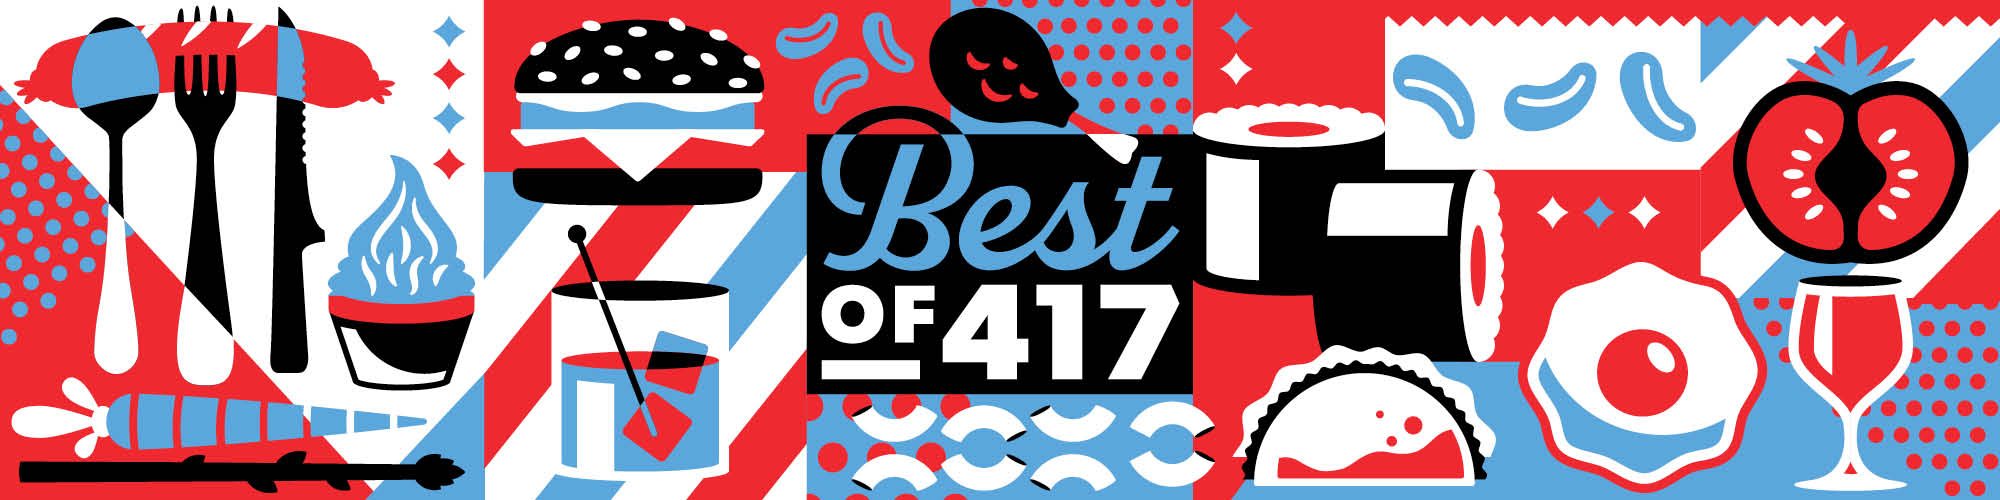 Best of 417 graphic collage banner